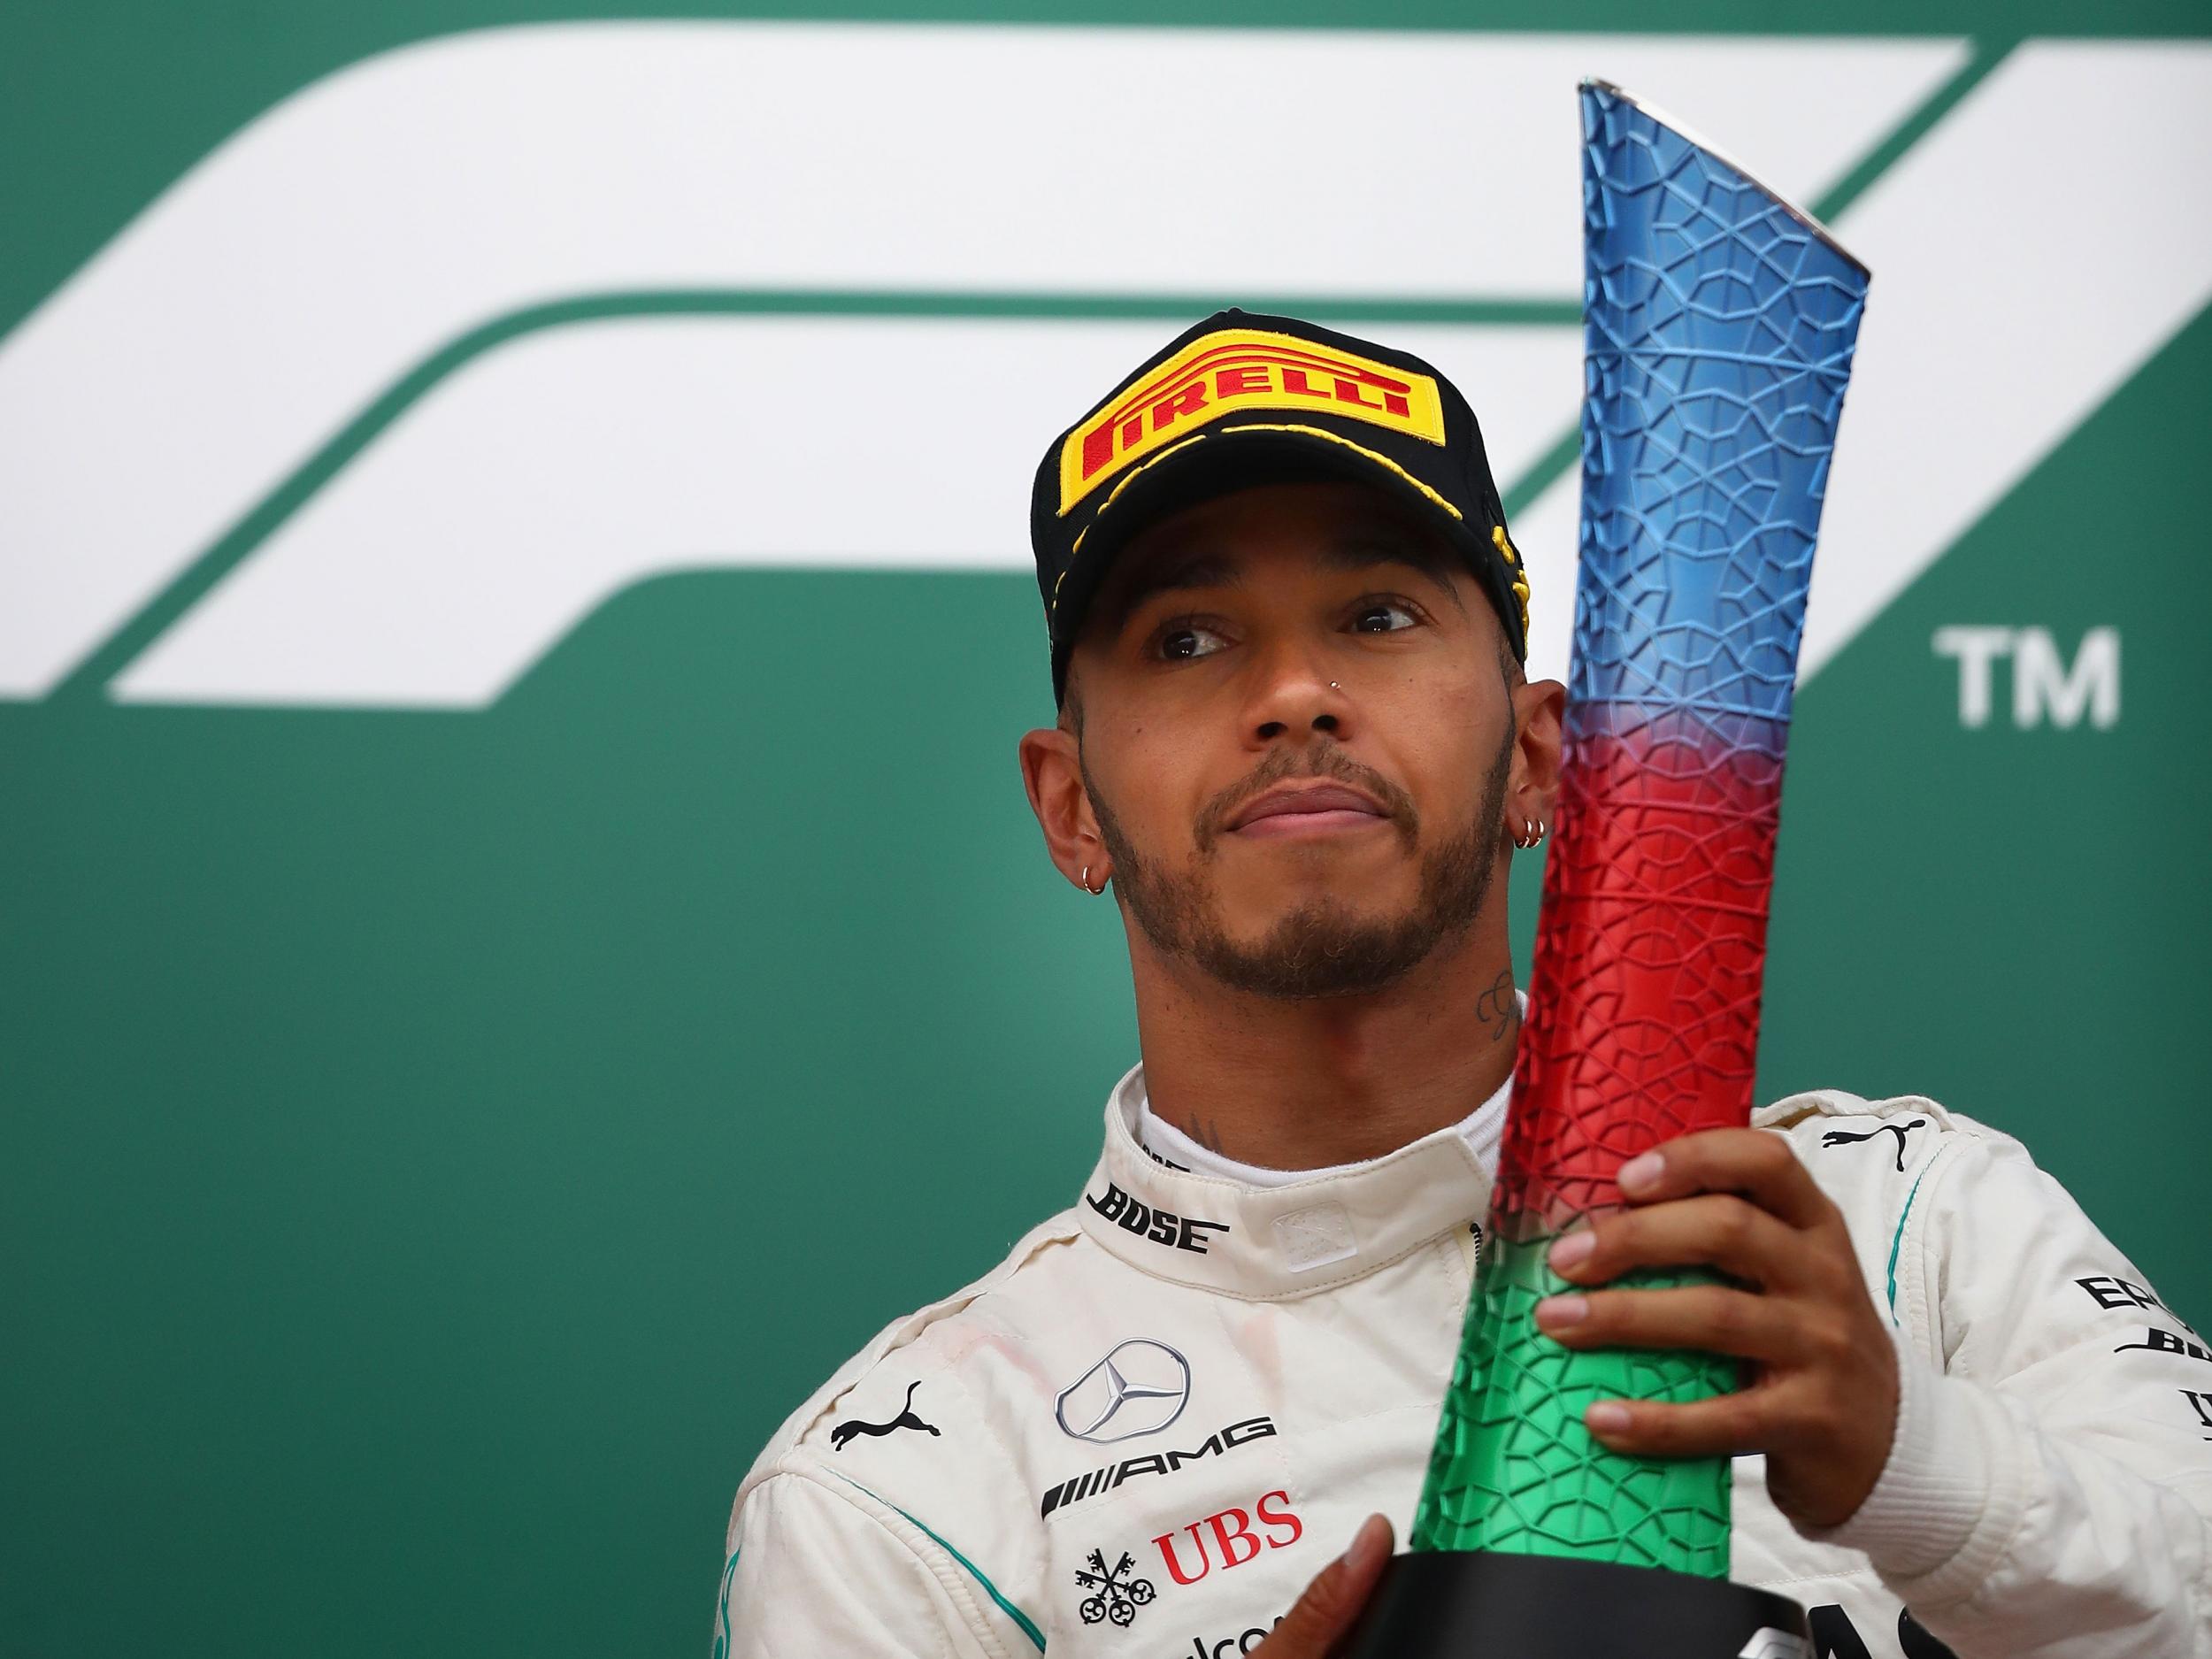 Hamilton lucked out to take the lead in the drivers' championship